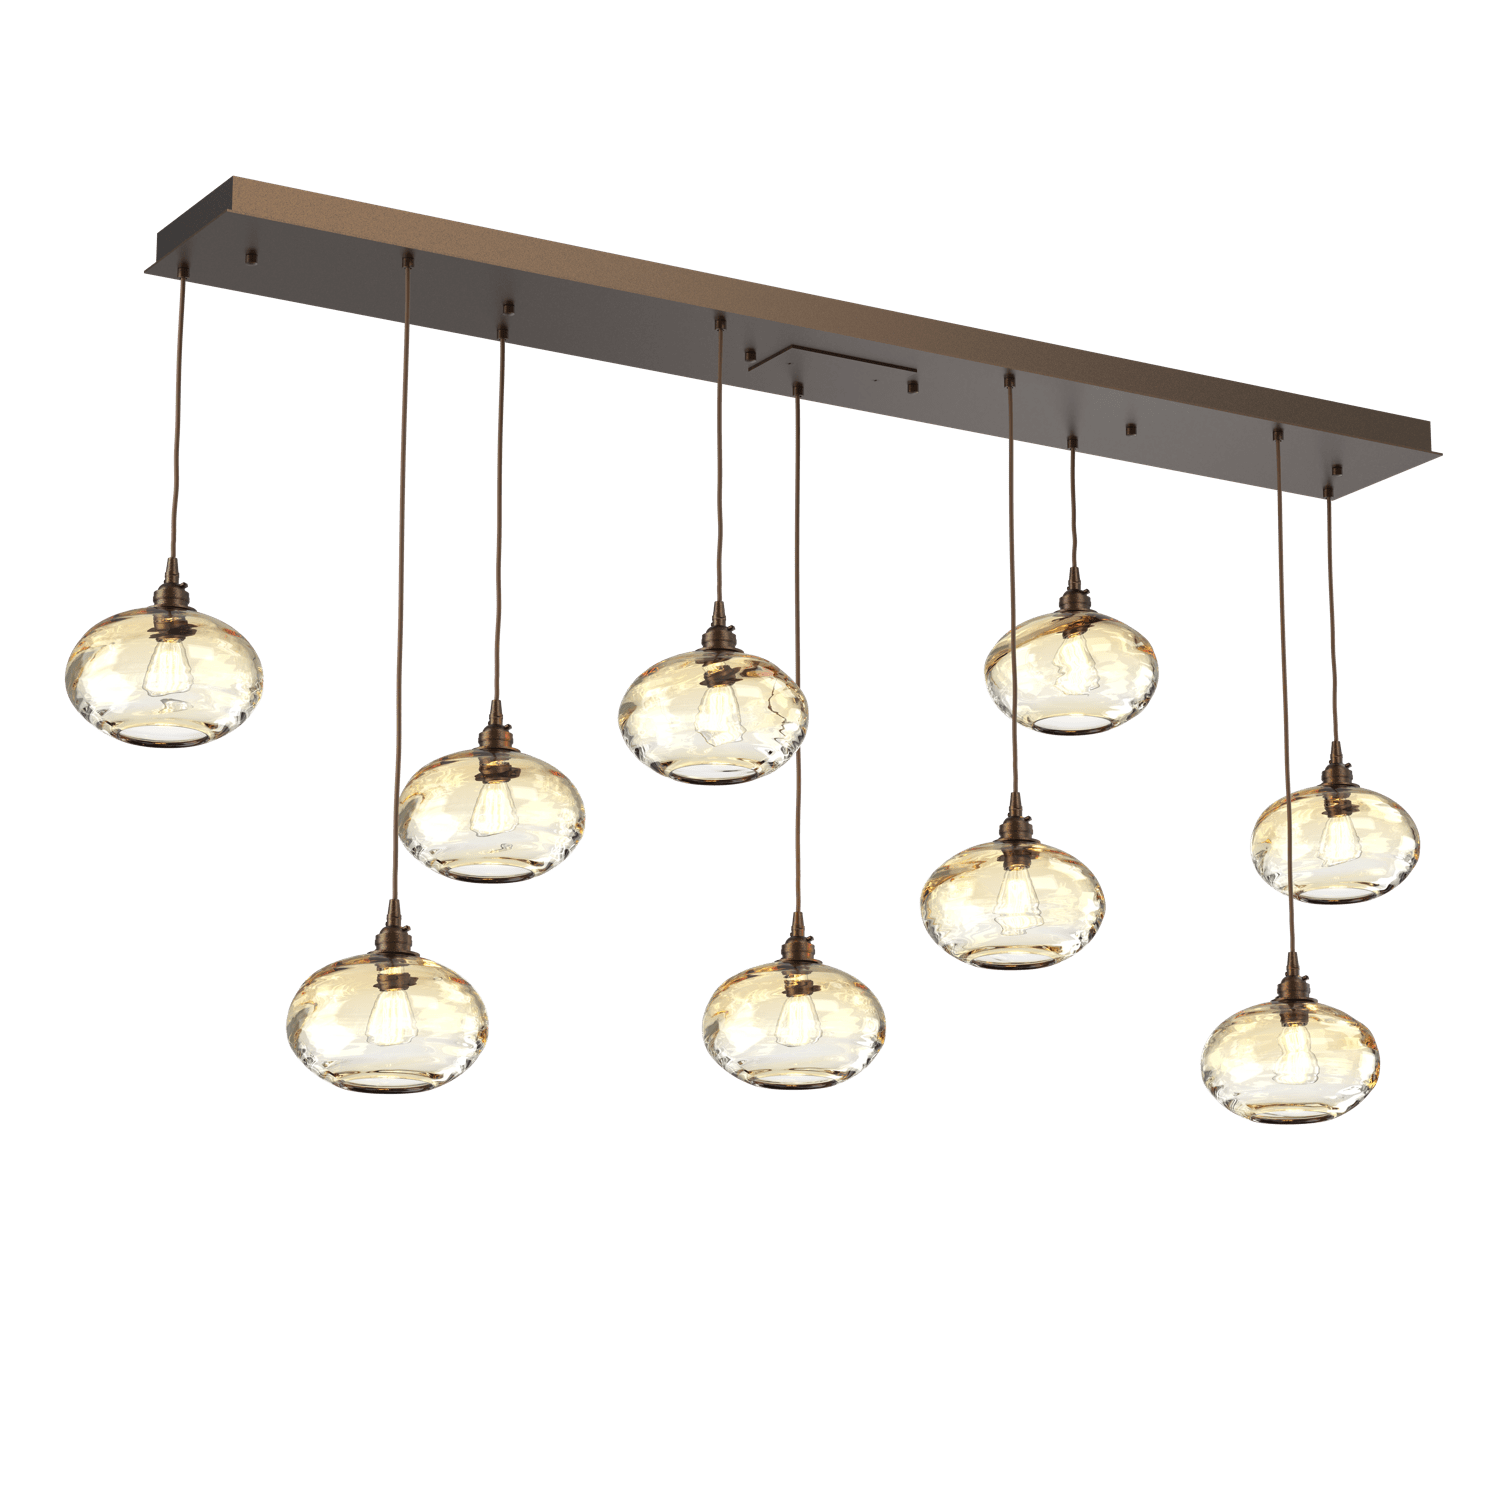 PLB0036-09-FB-OA-Hammerton-Studio-Optic-Blown-Glass-Coppa-9-light-linear-pendant-chandelier-with-flat-bronze-finish-and-optic-amber-blown-glass-shades-and-incandescent-lamping